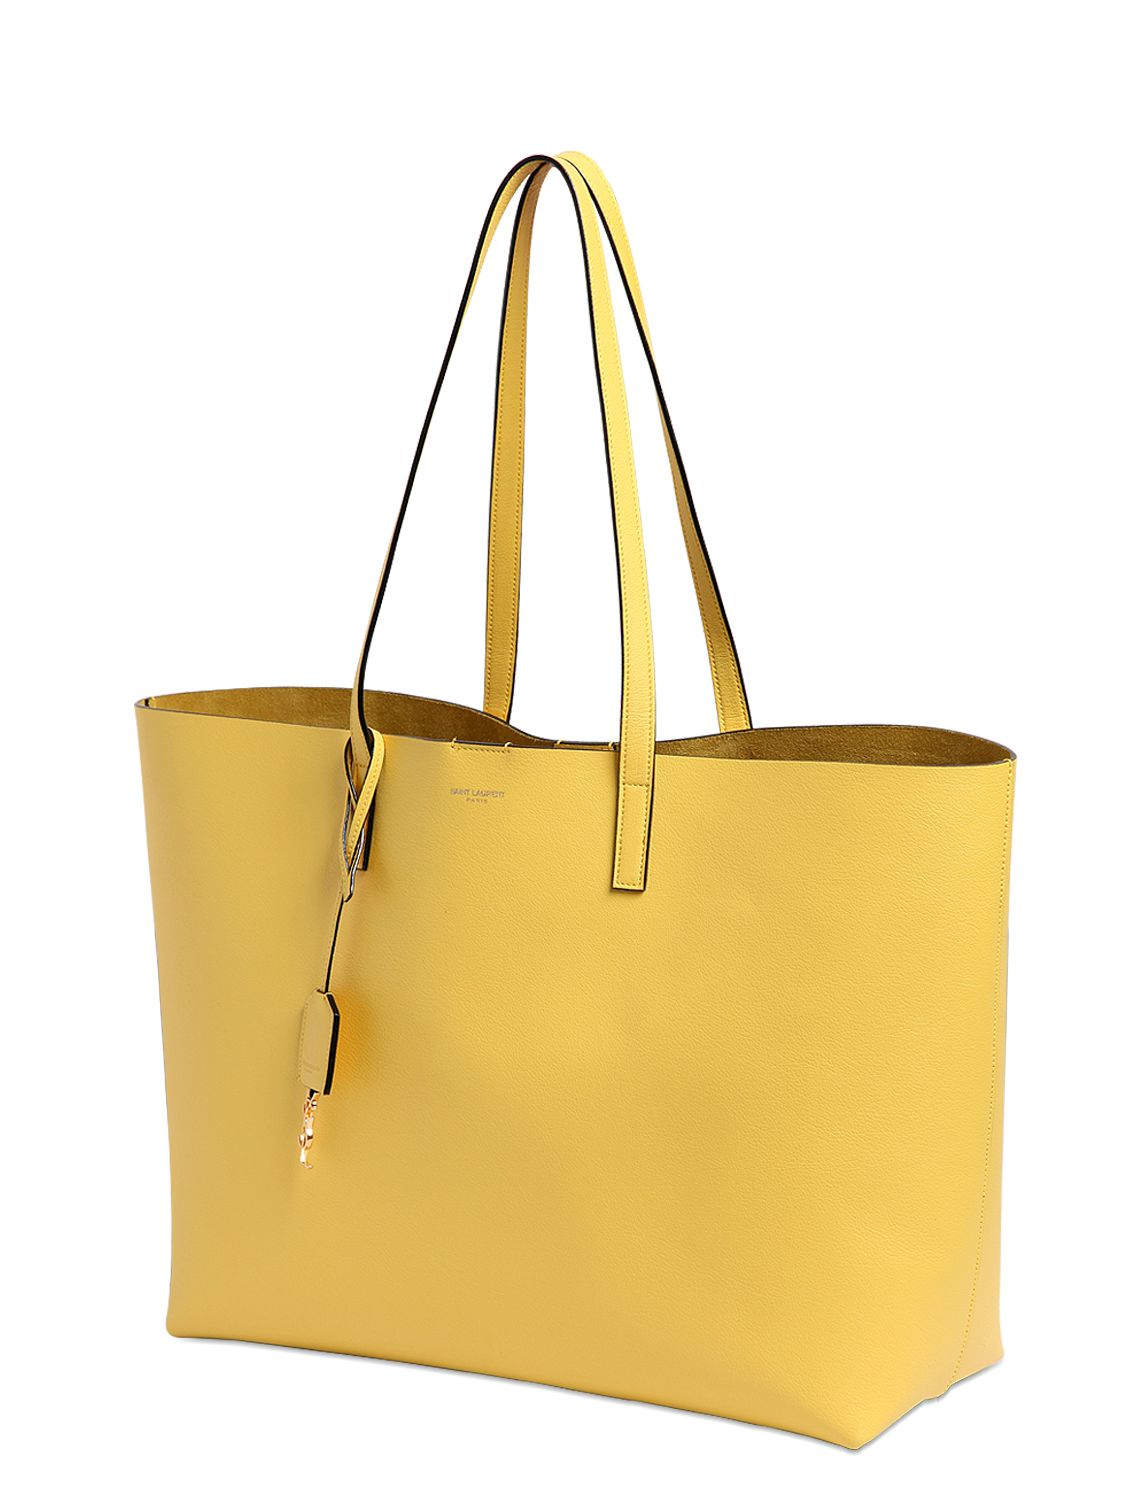 Saint laurent Soft Leather Tote Bag in Yellow | Lyst